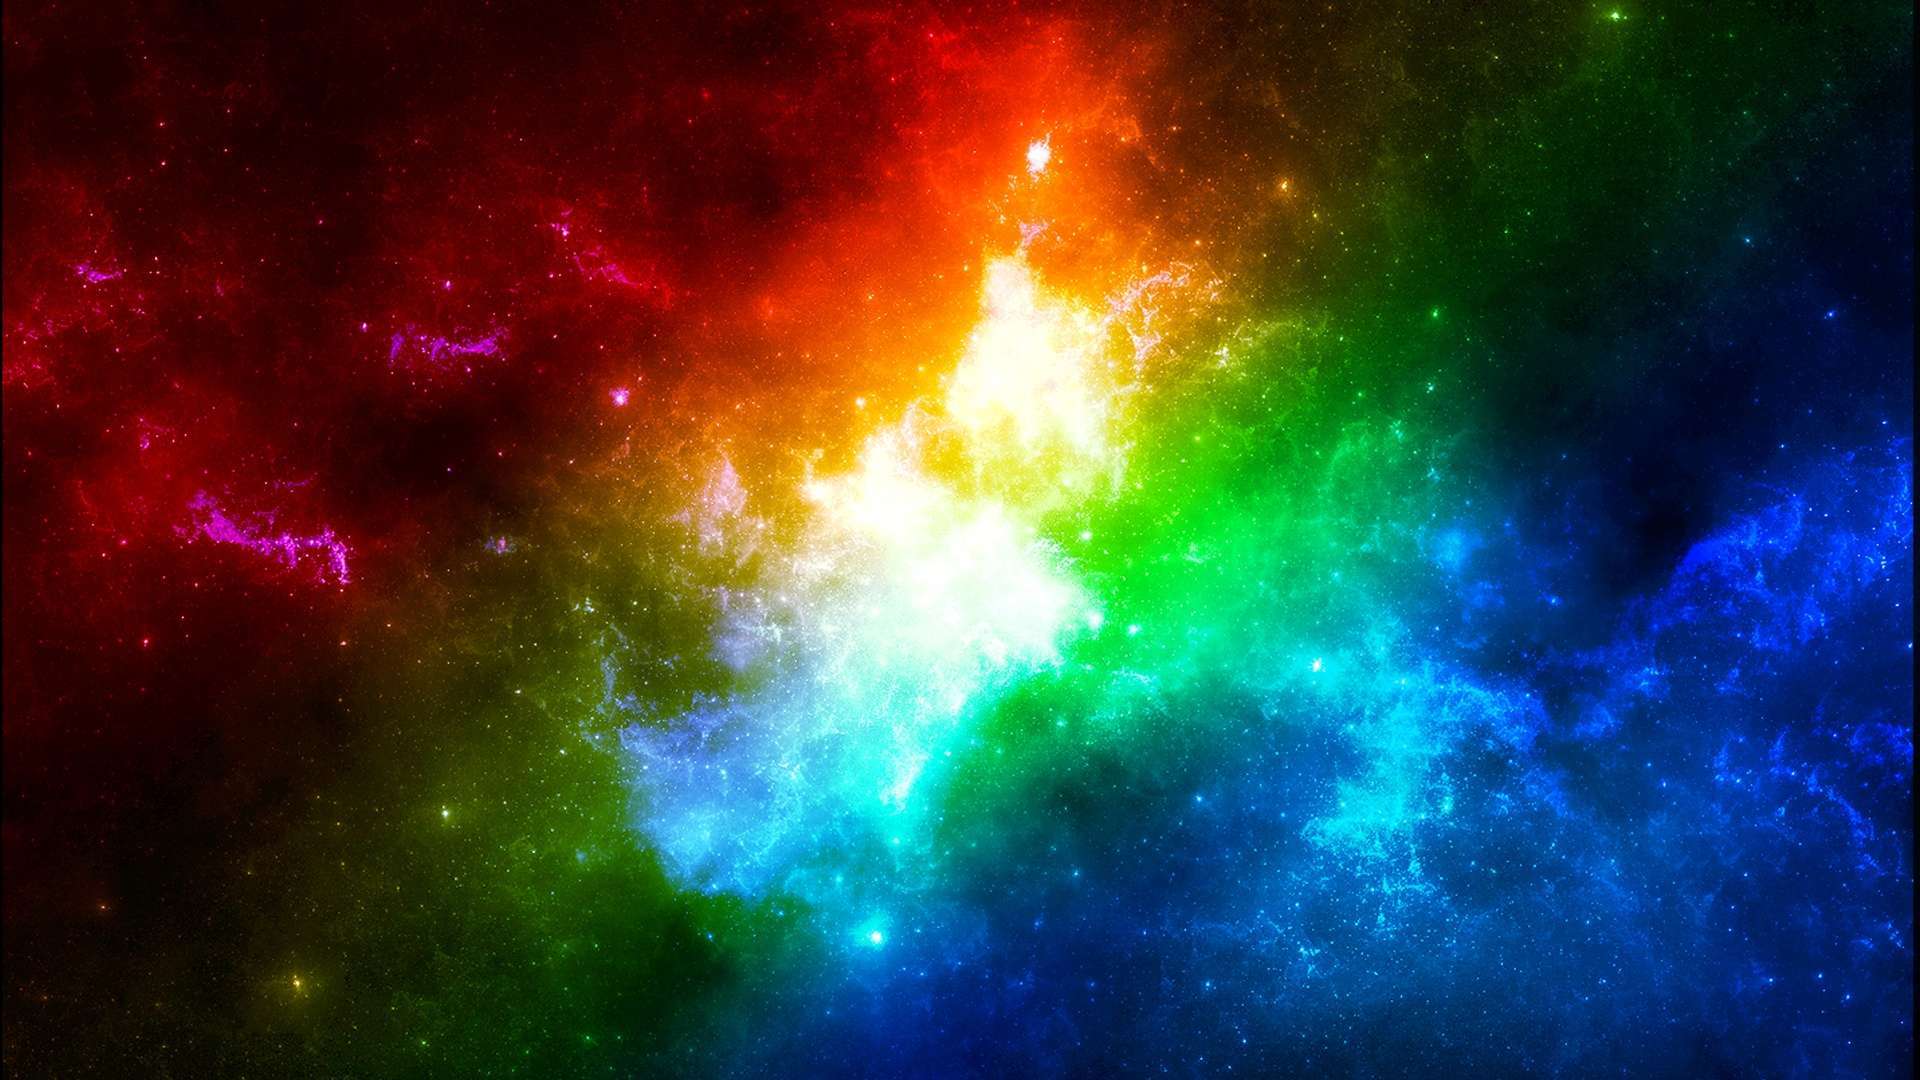 Wallpaper.wiki 1080p Colors In Space Background PIC WPD008669